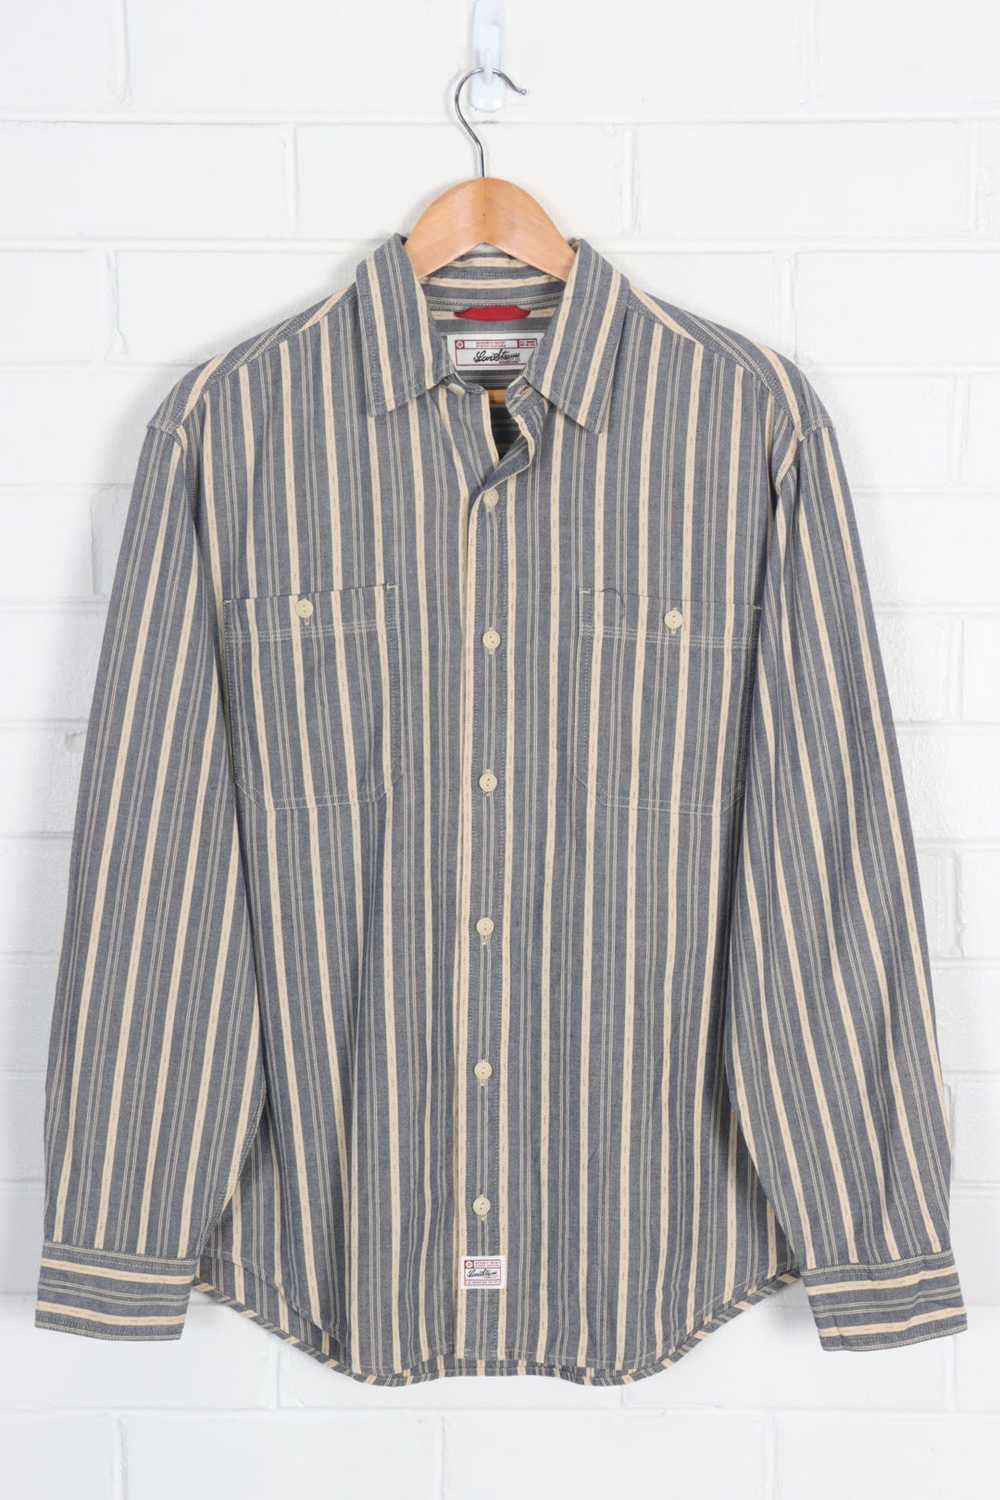 LEVI'S Blue & Beige Striped Button Up Long Sleeve… - image 1